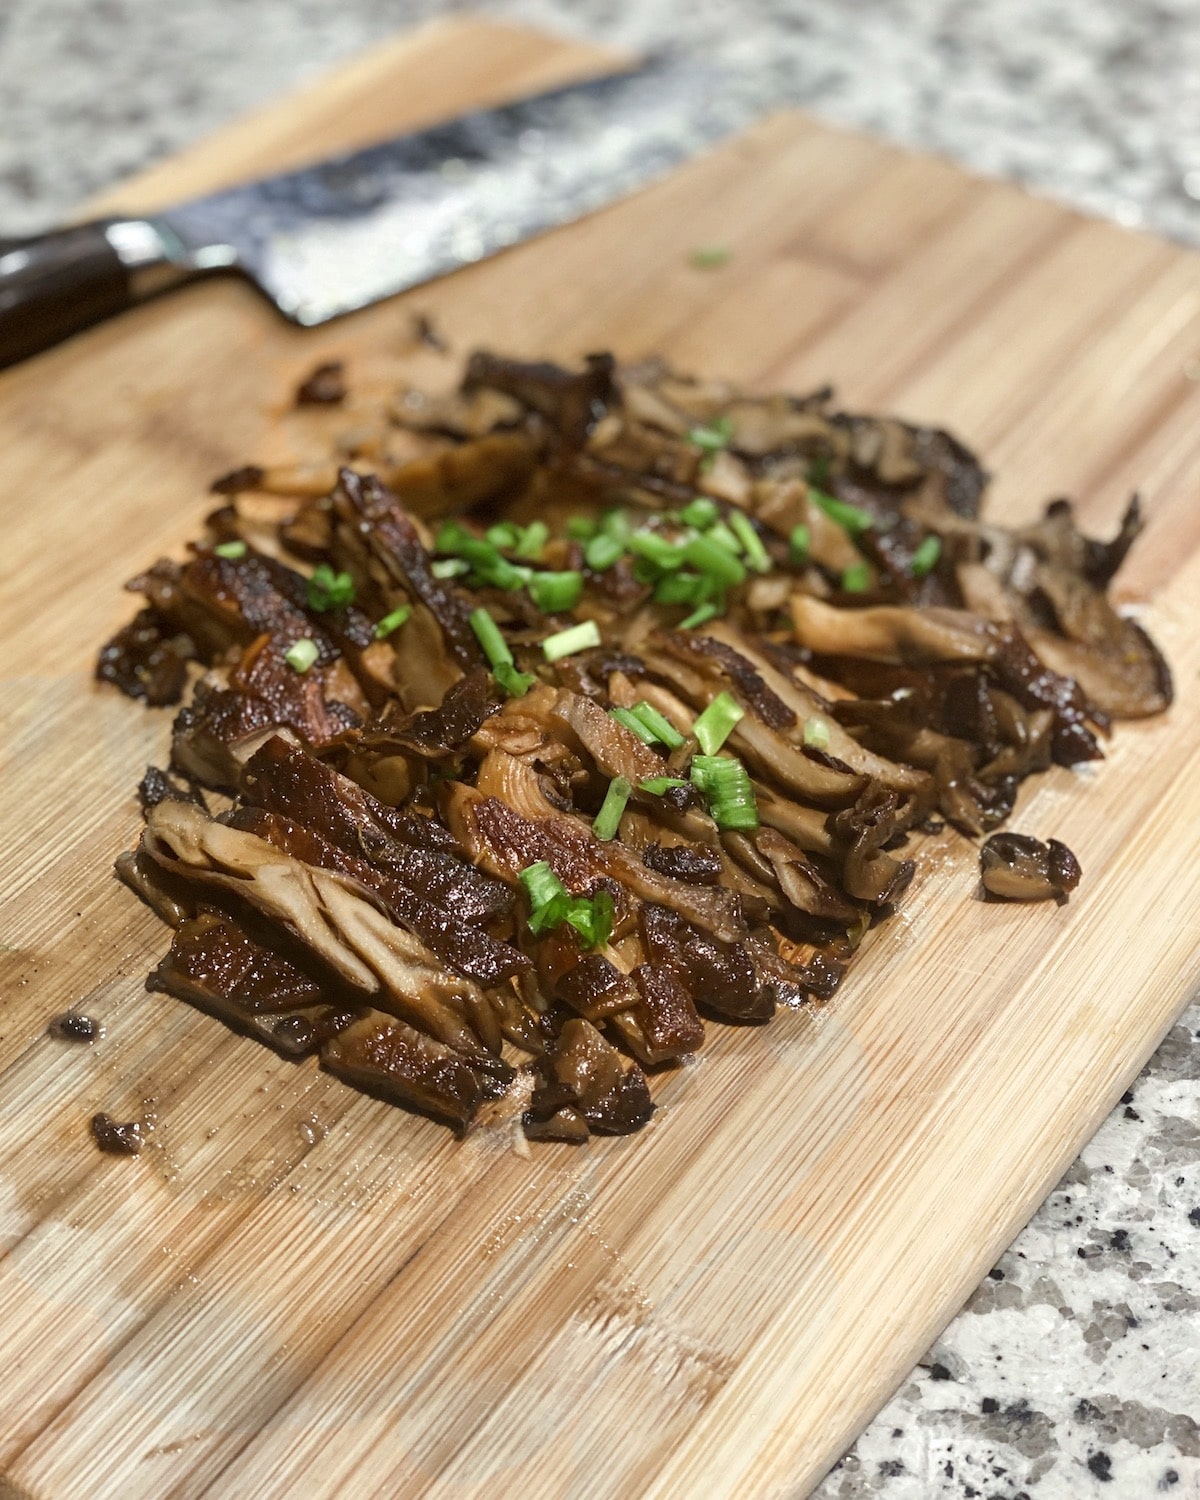 Teriyaki mushrooms garnished with spring onions on a brown bamboo cutting board with a knife in the background.